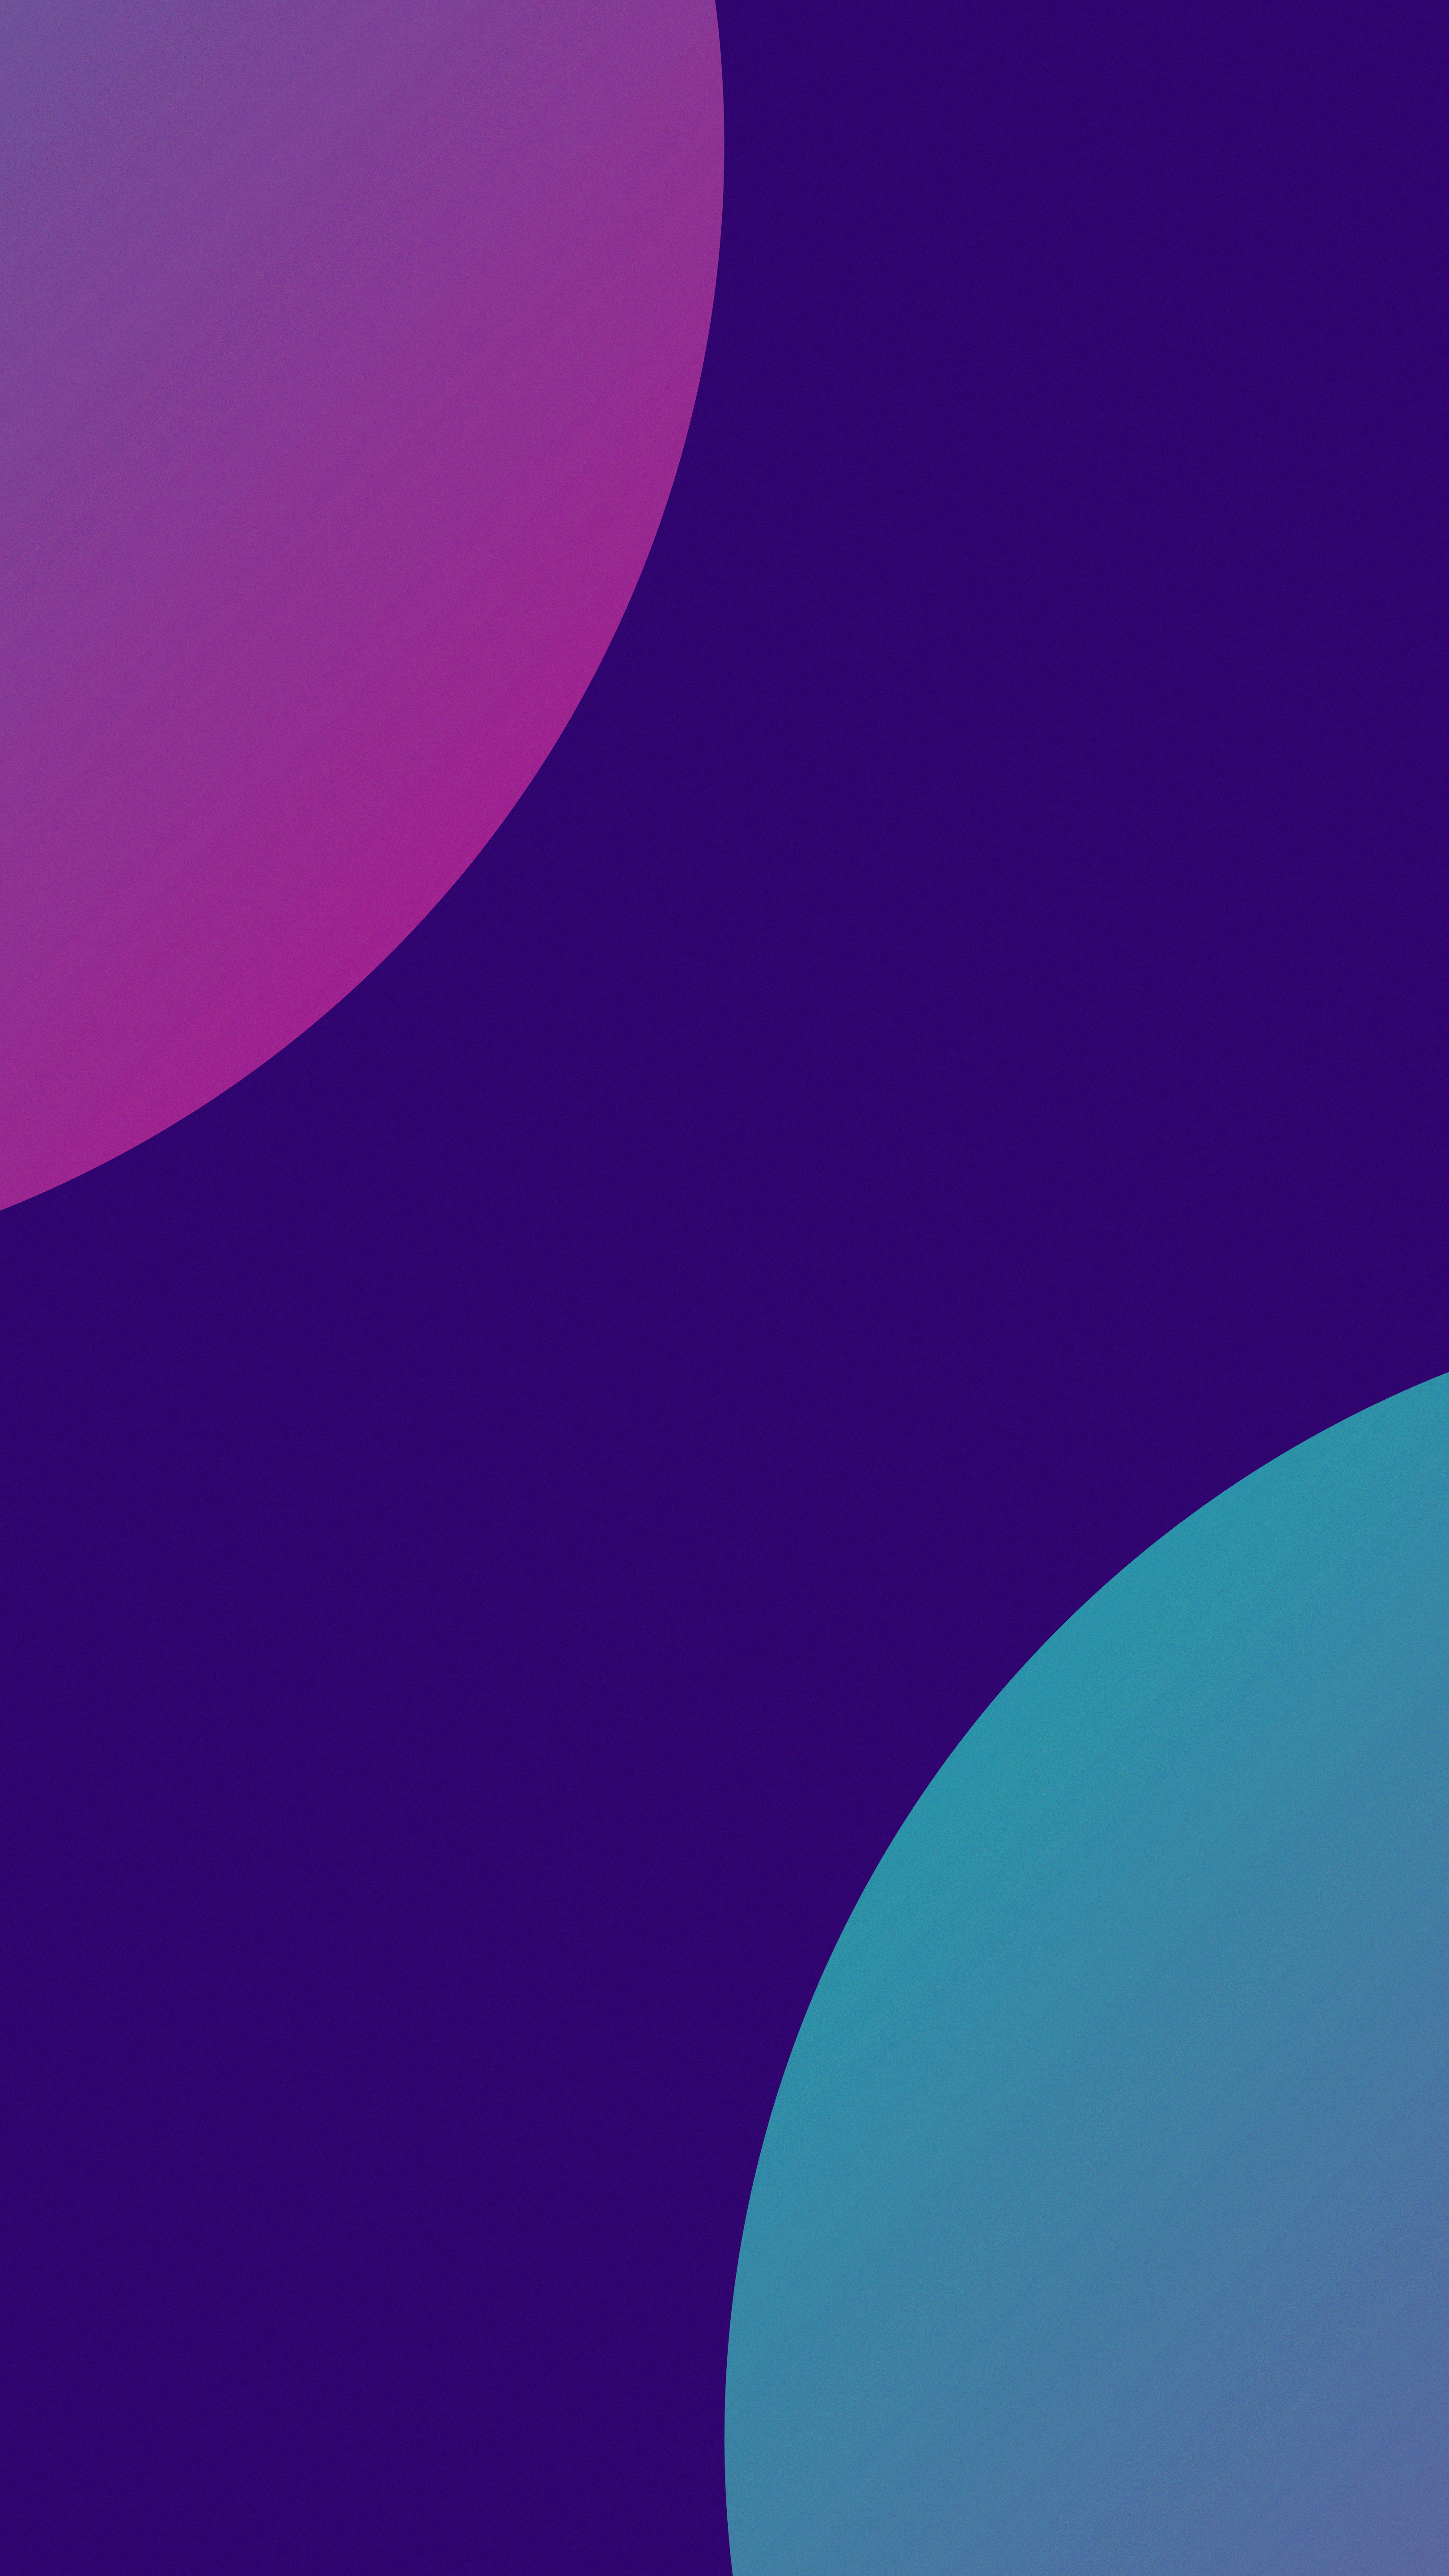 fluent, abstract, purple, blue, lines, violet, minimalism, smooth